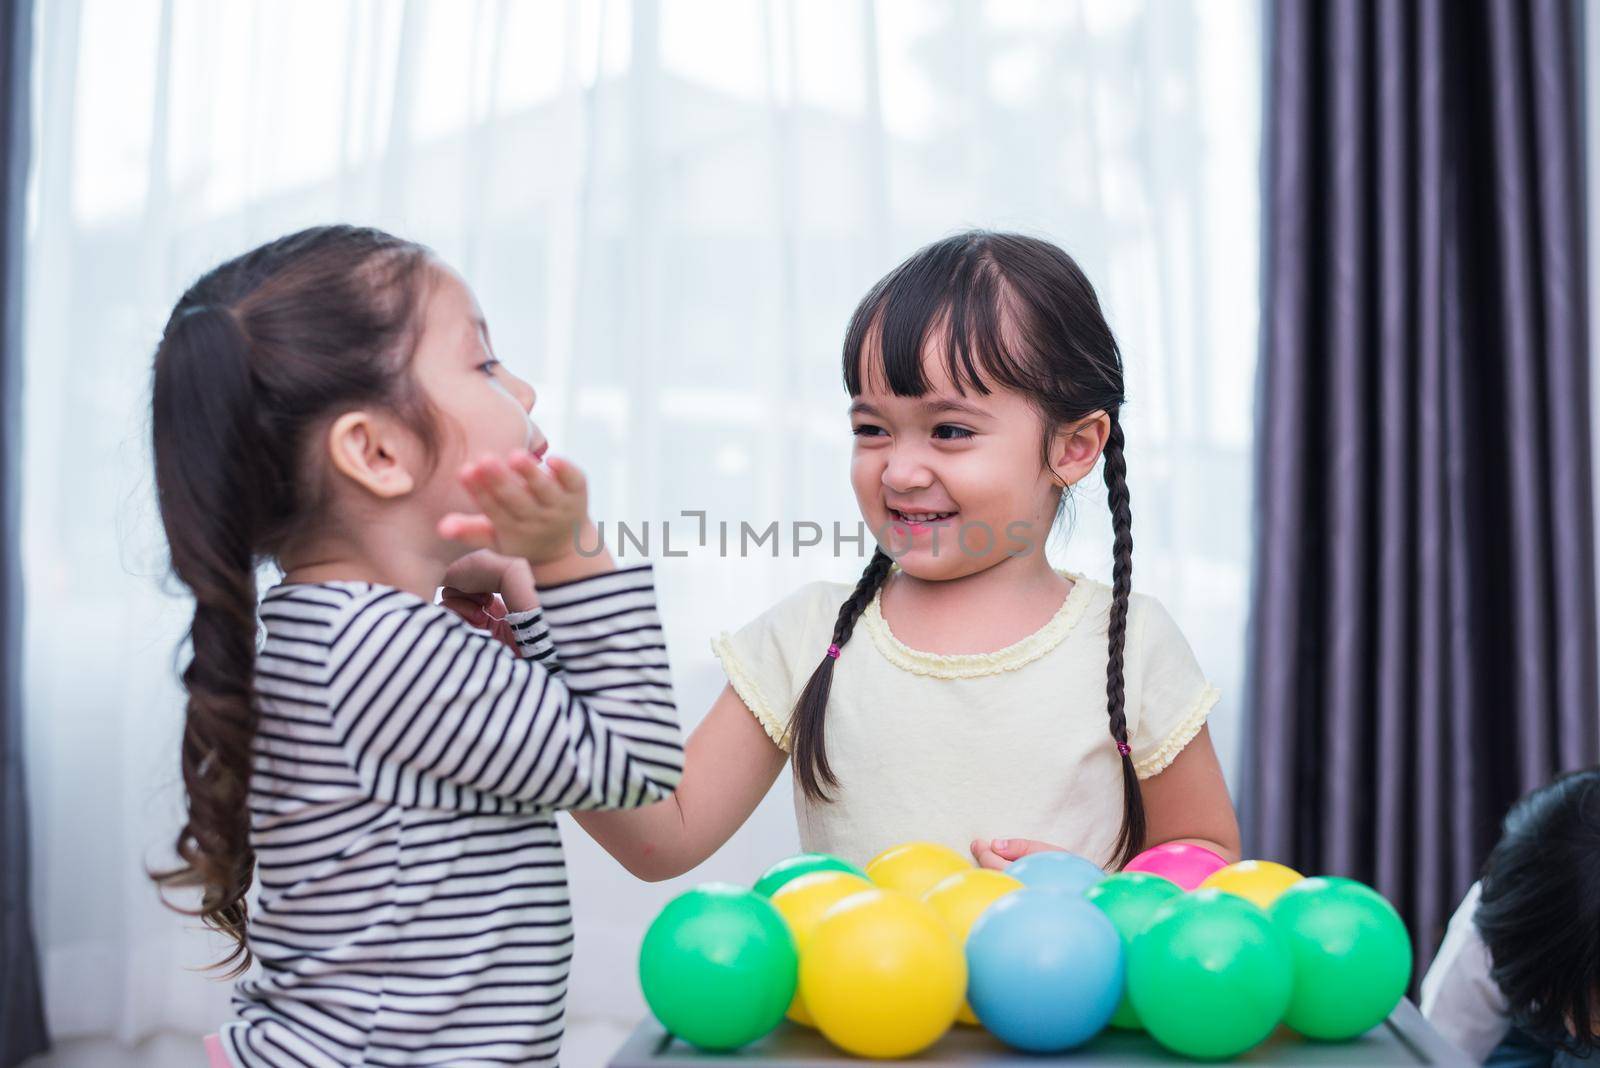 Two little girls playing small toy balls in home together. Education and Happiness lifestyle concept. Funny learning and Children development theme. Smile faces